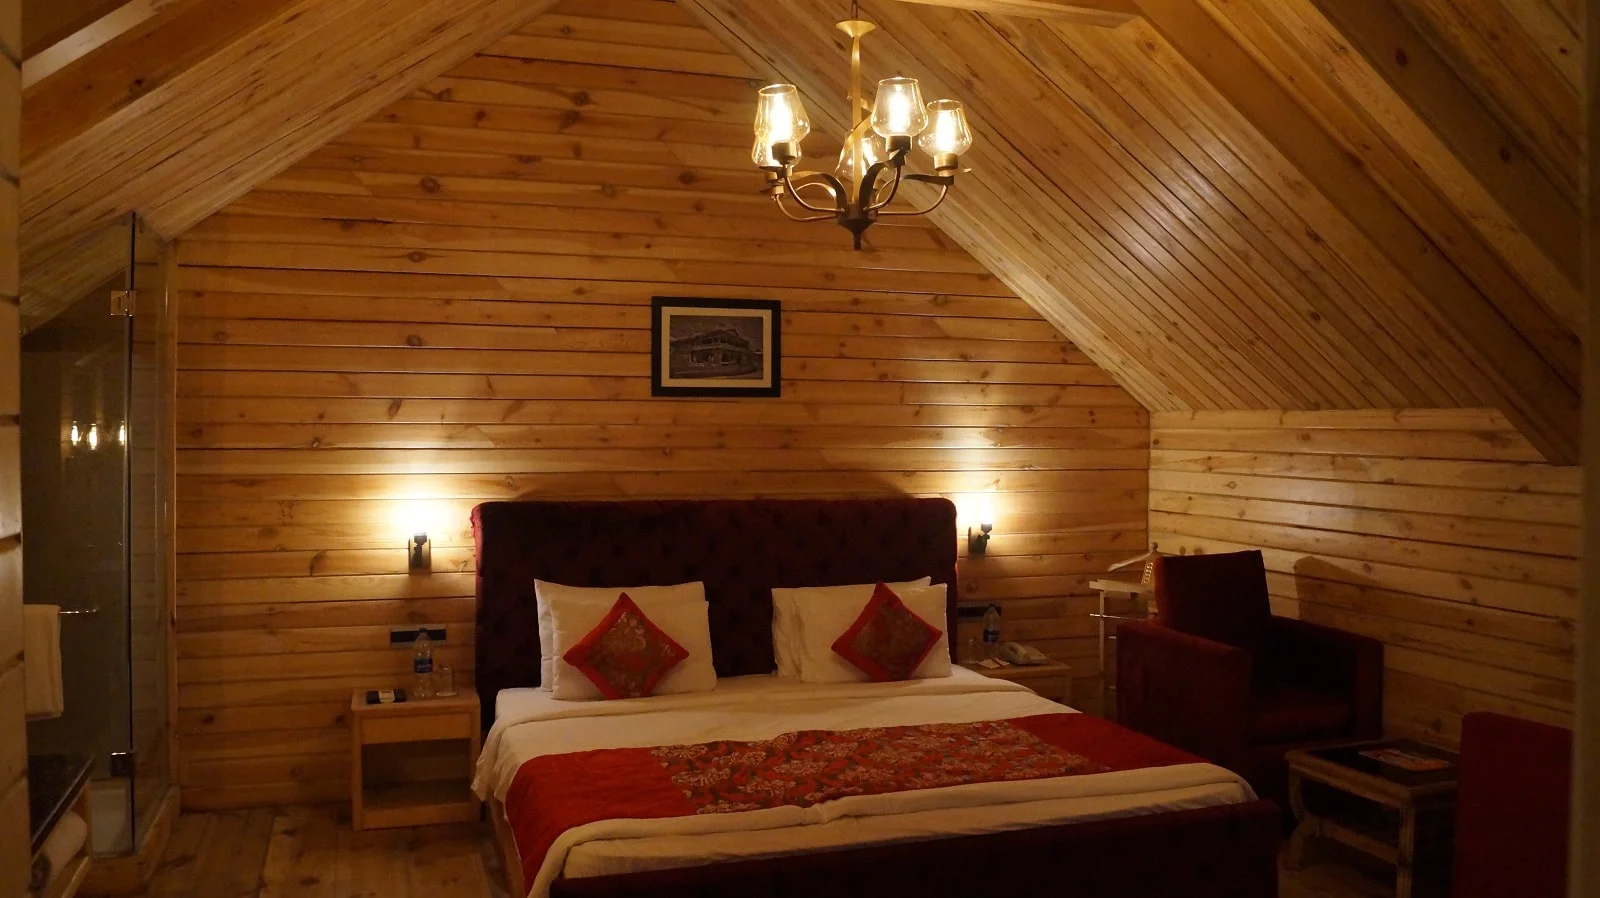 These carefully crafted two-bedroom cottages with king-sized beds.